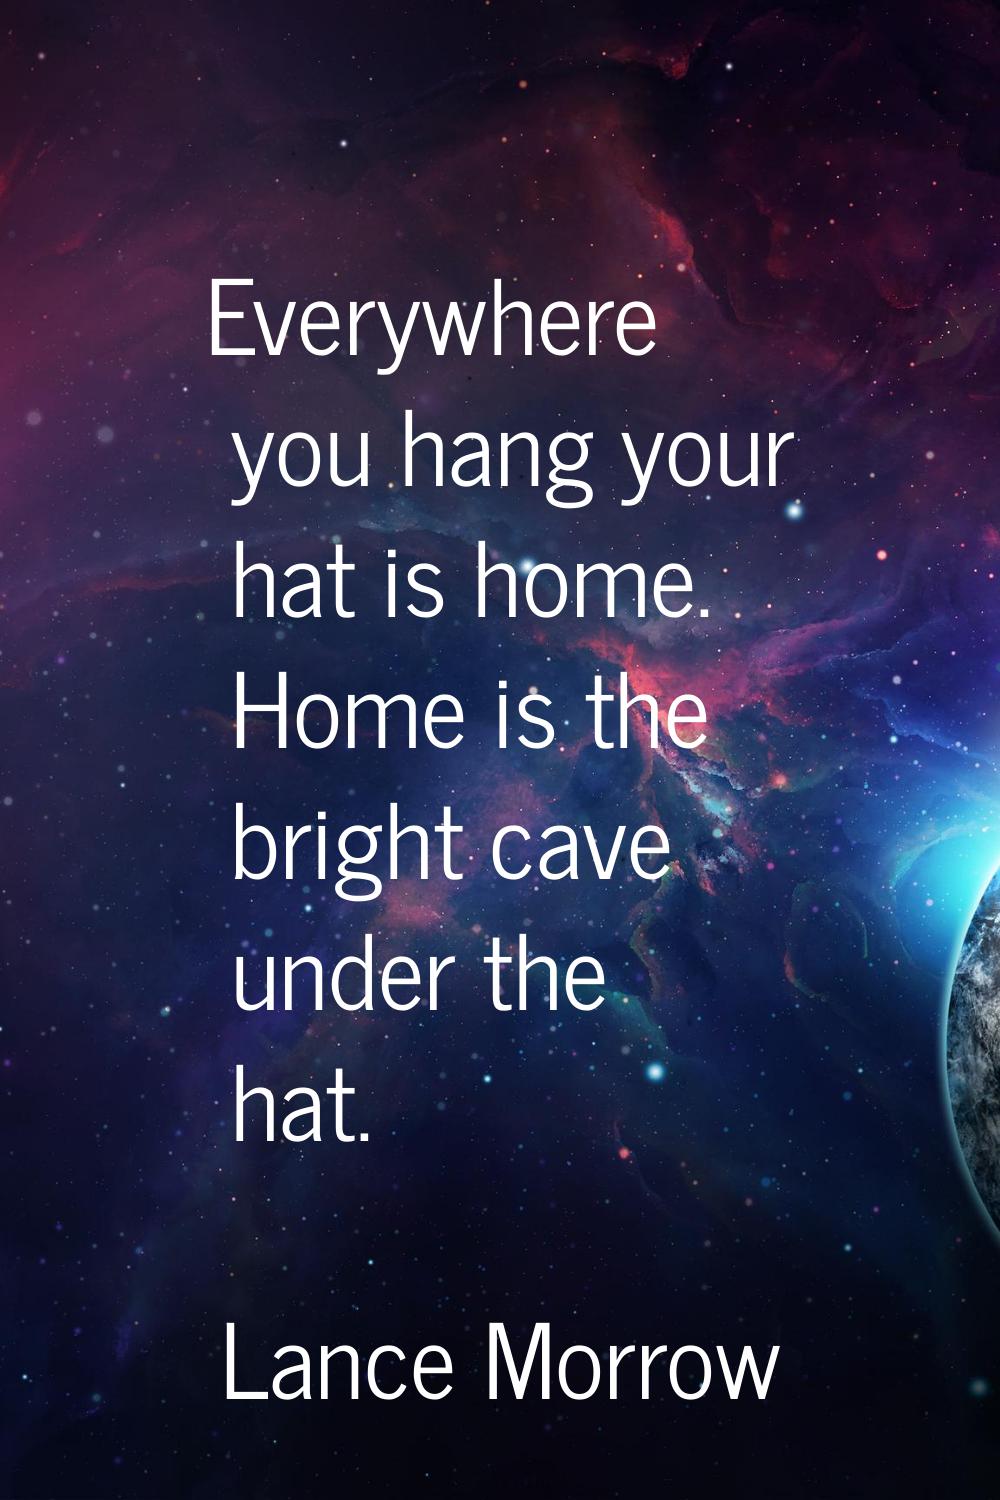 Everywhere you hang your hat is home. Home is the bright cave under the hat.